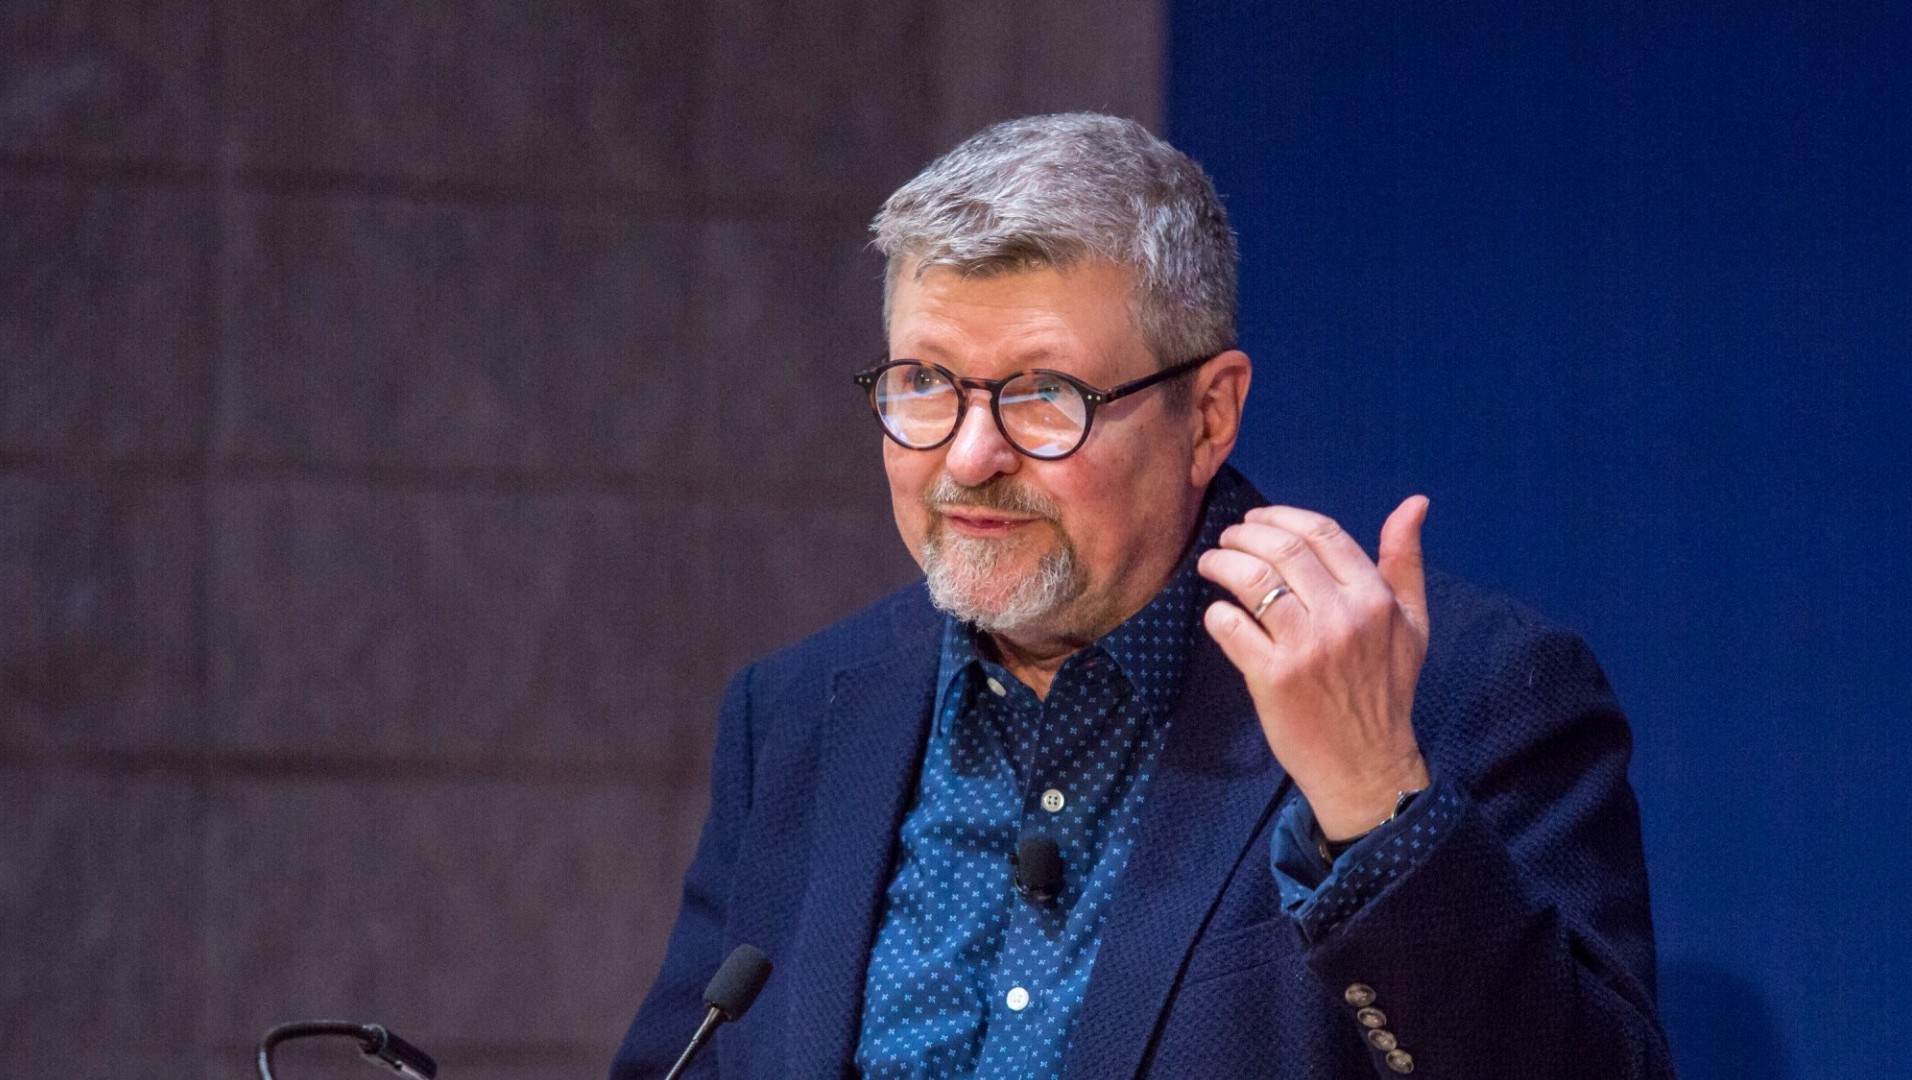 Photo of George Chauncey giving lecture, wearing glasses and blue shirt and jacket